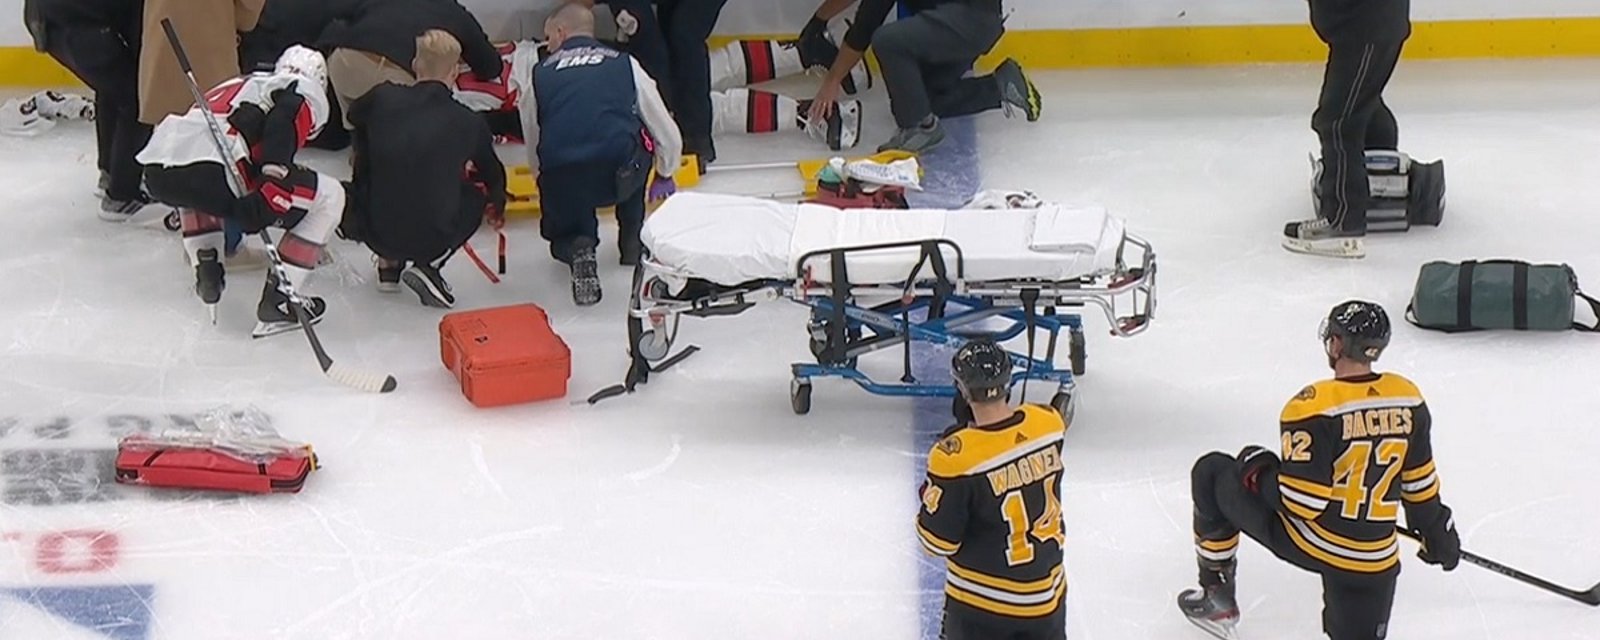 Big updates on Backes and Sabourin following terrible incident earlier this season.